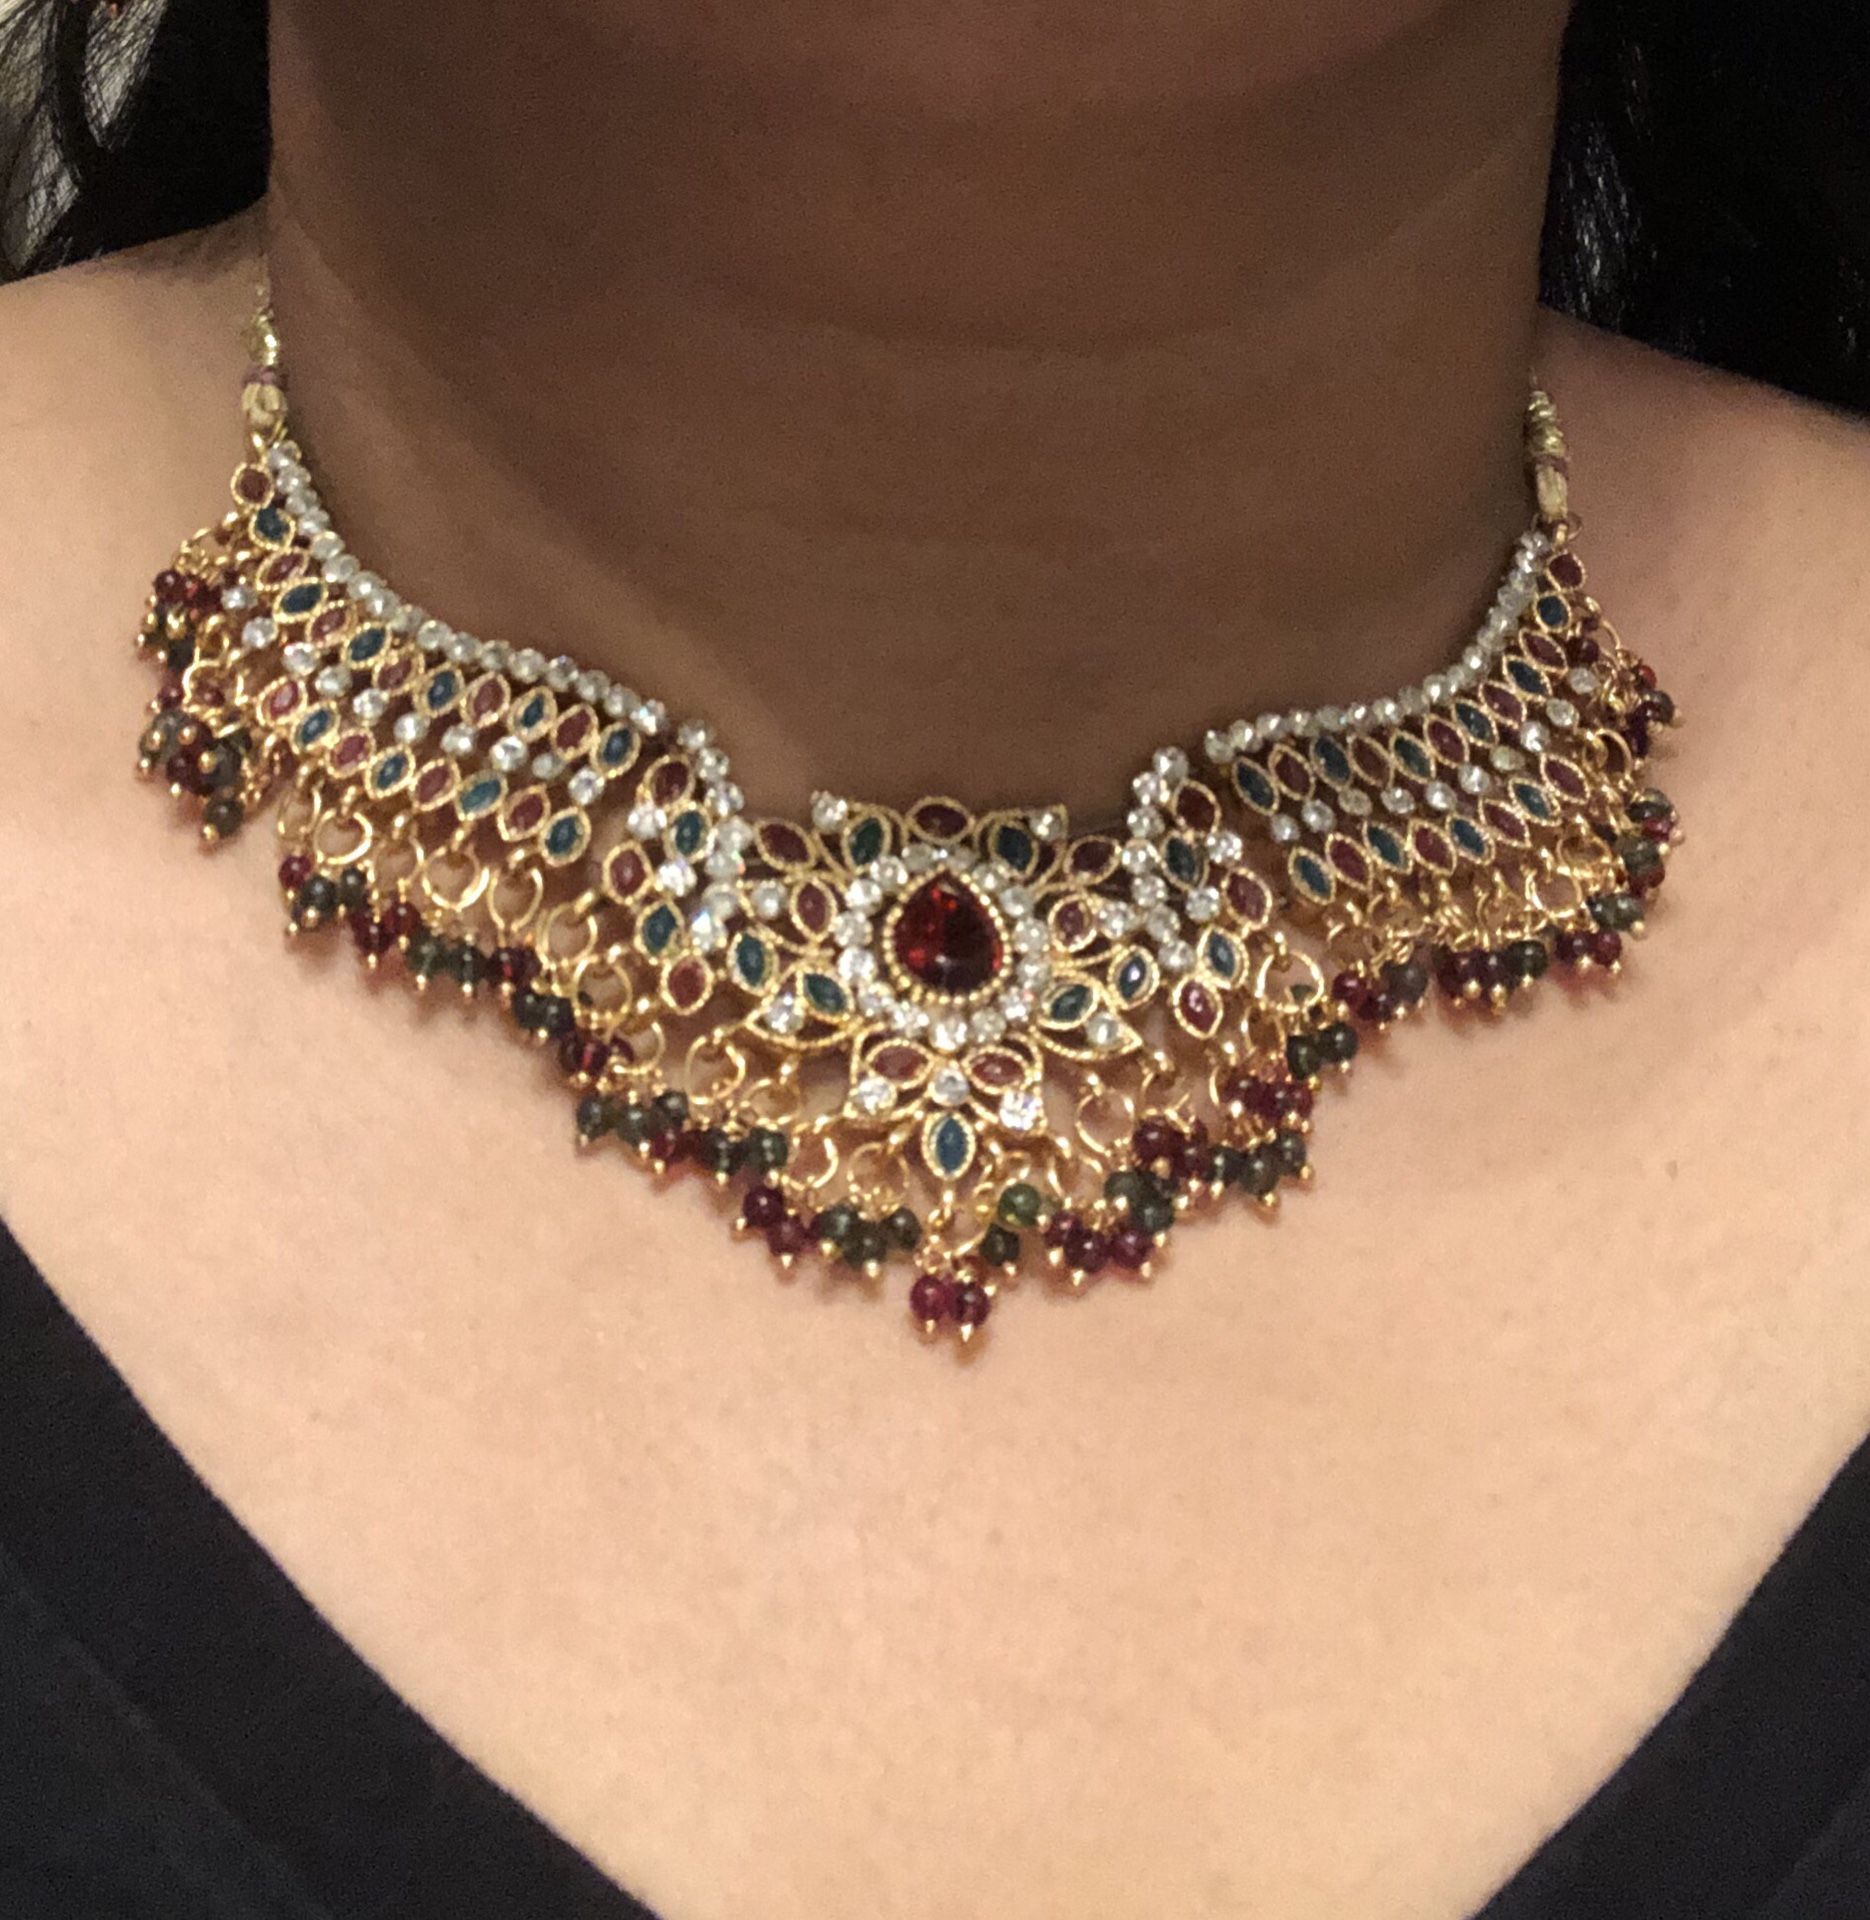 Necklace, Earrings & Bindi formal jewelry with head piece full neck